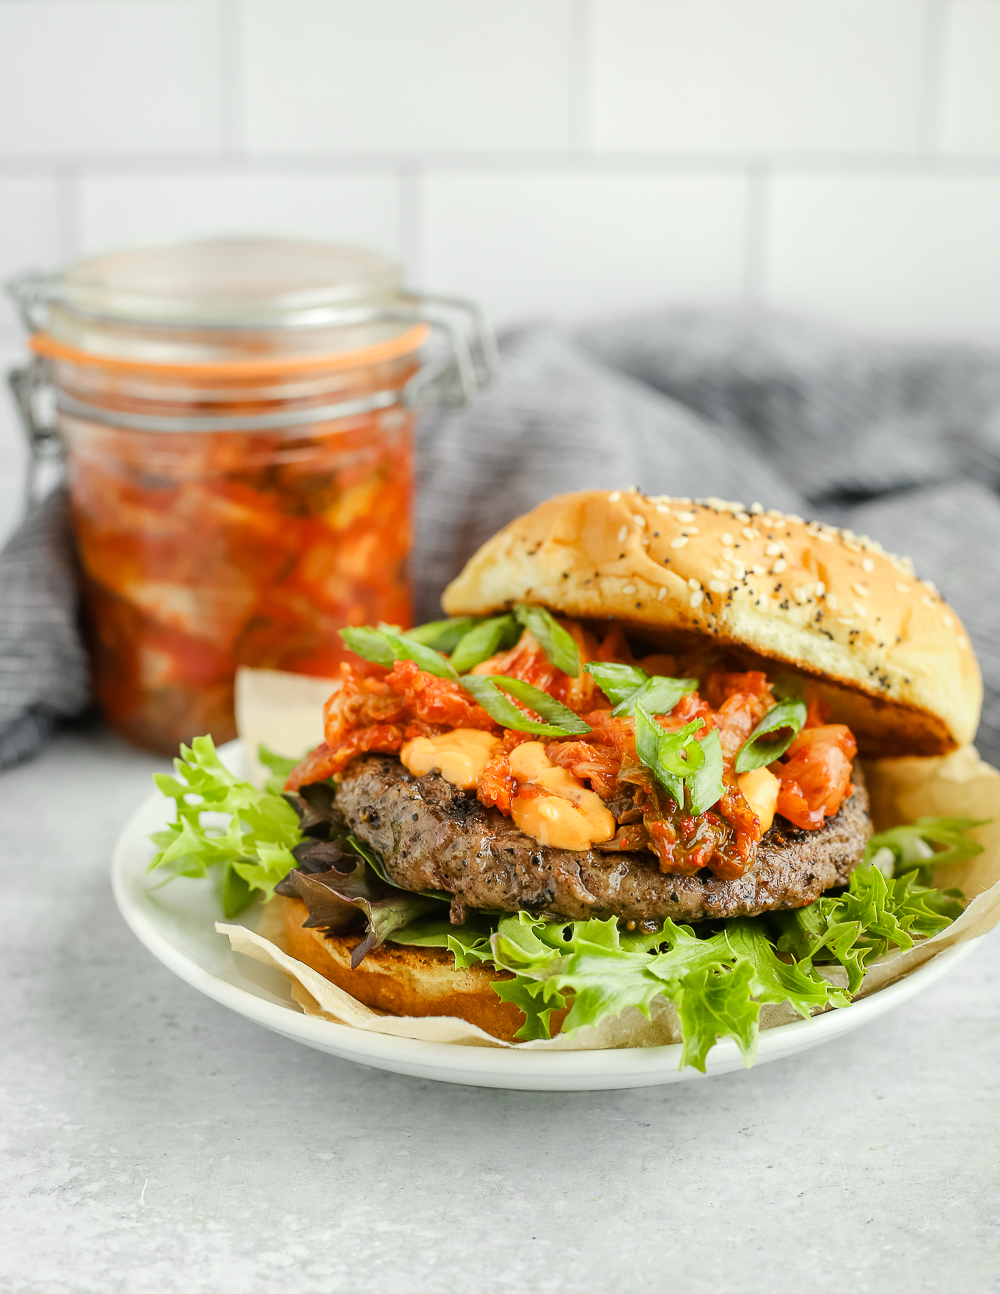 A side view of a beef burger topped with spicy mayo and kimchi with lettuce and green onion slices, served on a small white dish with a jar of prepared kimchi in the background